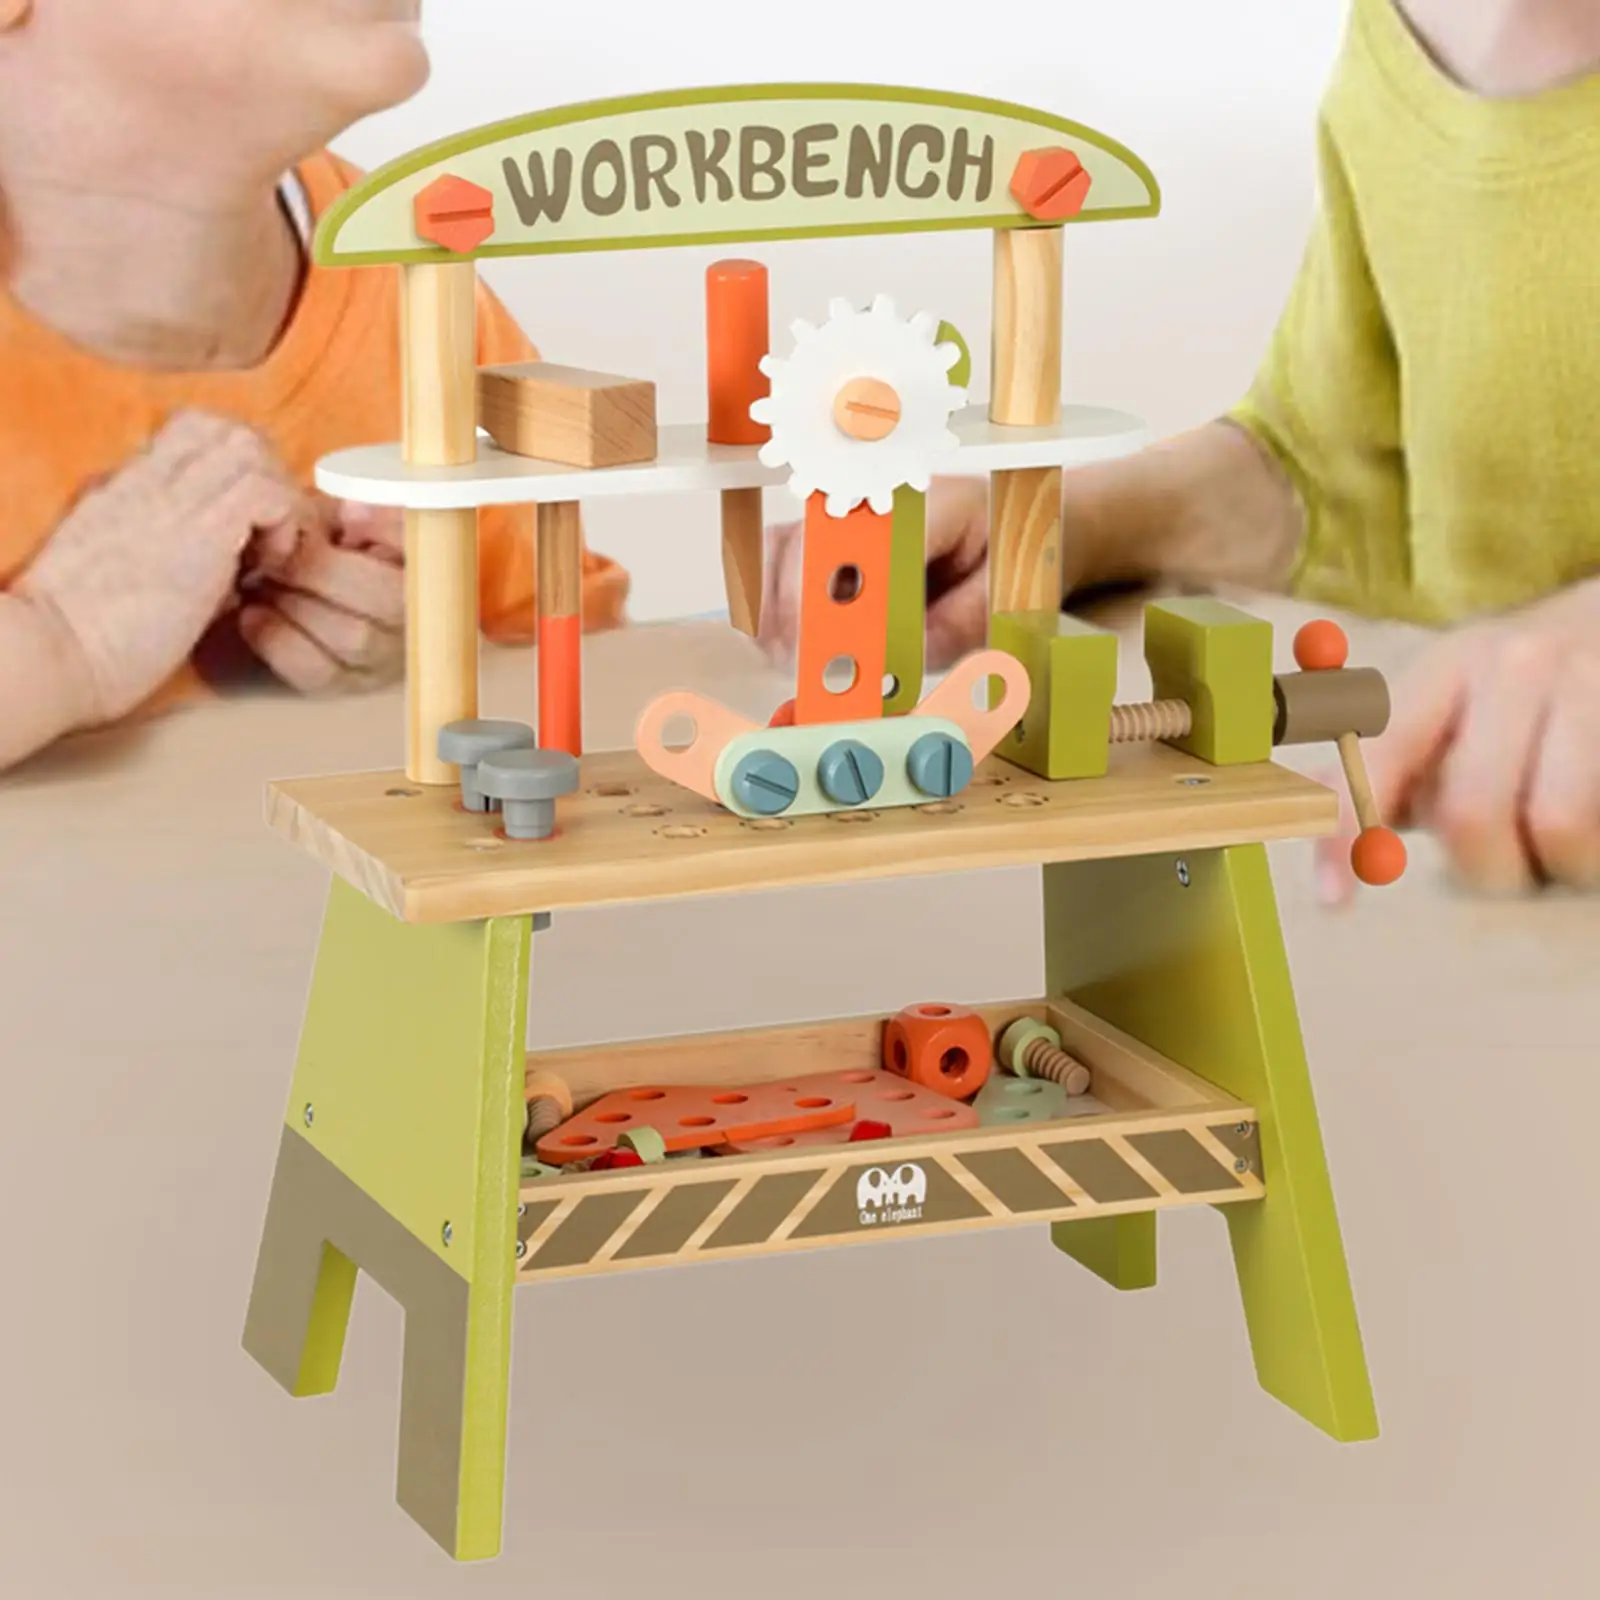 Small Wooden Kid Workbench Toy DIY Children Repair Play Tool Set for Christmas Gifts Child Ages 3+ Holiday Present Girls Boys